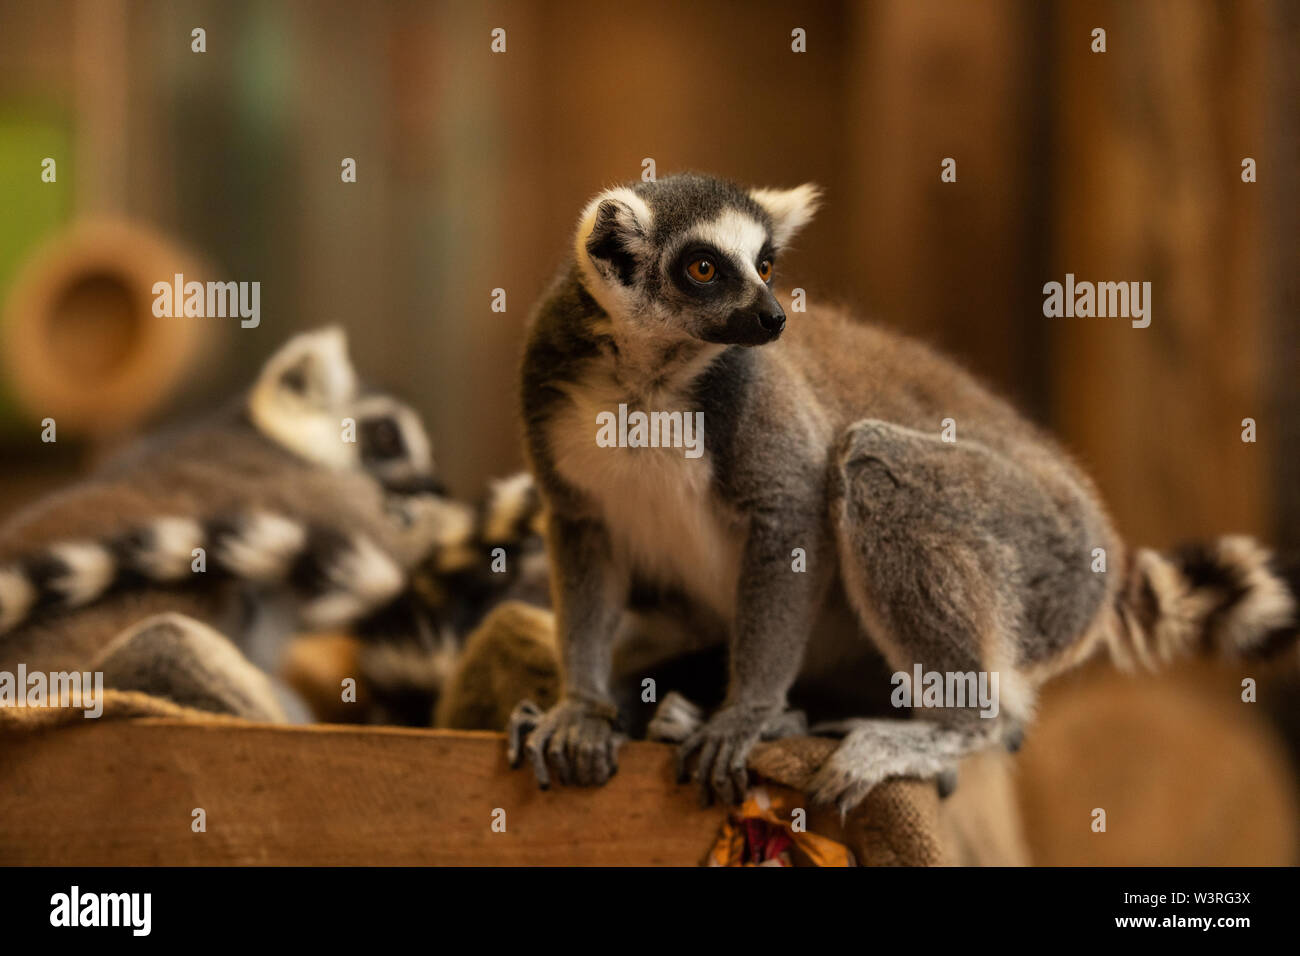 A ring-tailed lemur (Lemur catta), an endangered species native to Madagascar, perched on a branch. Stock Photo